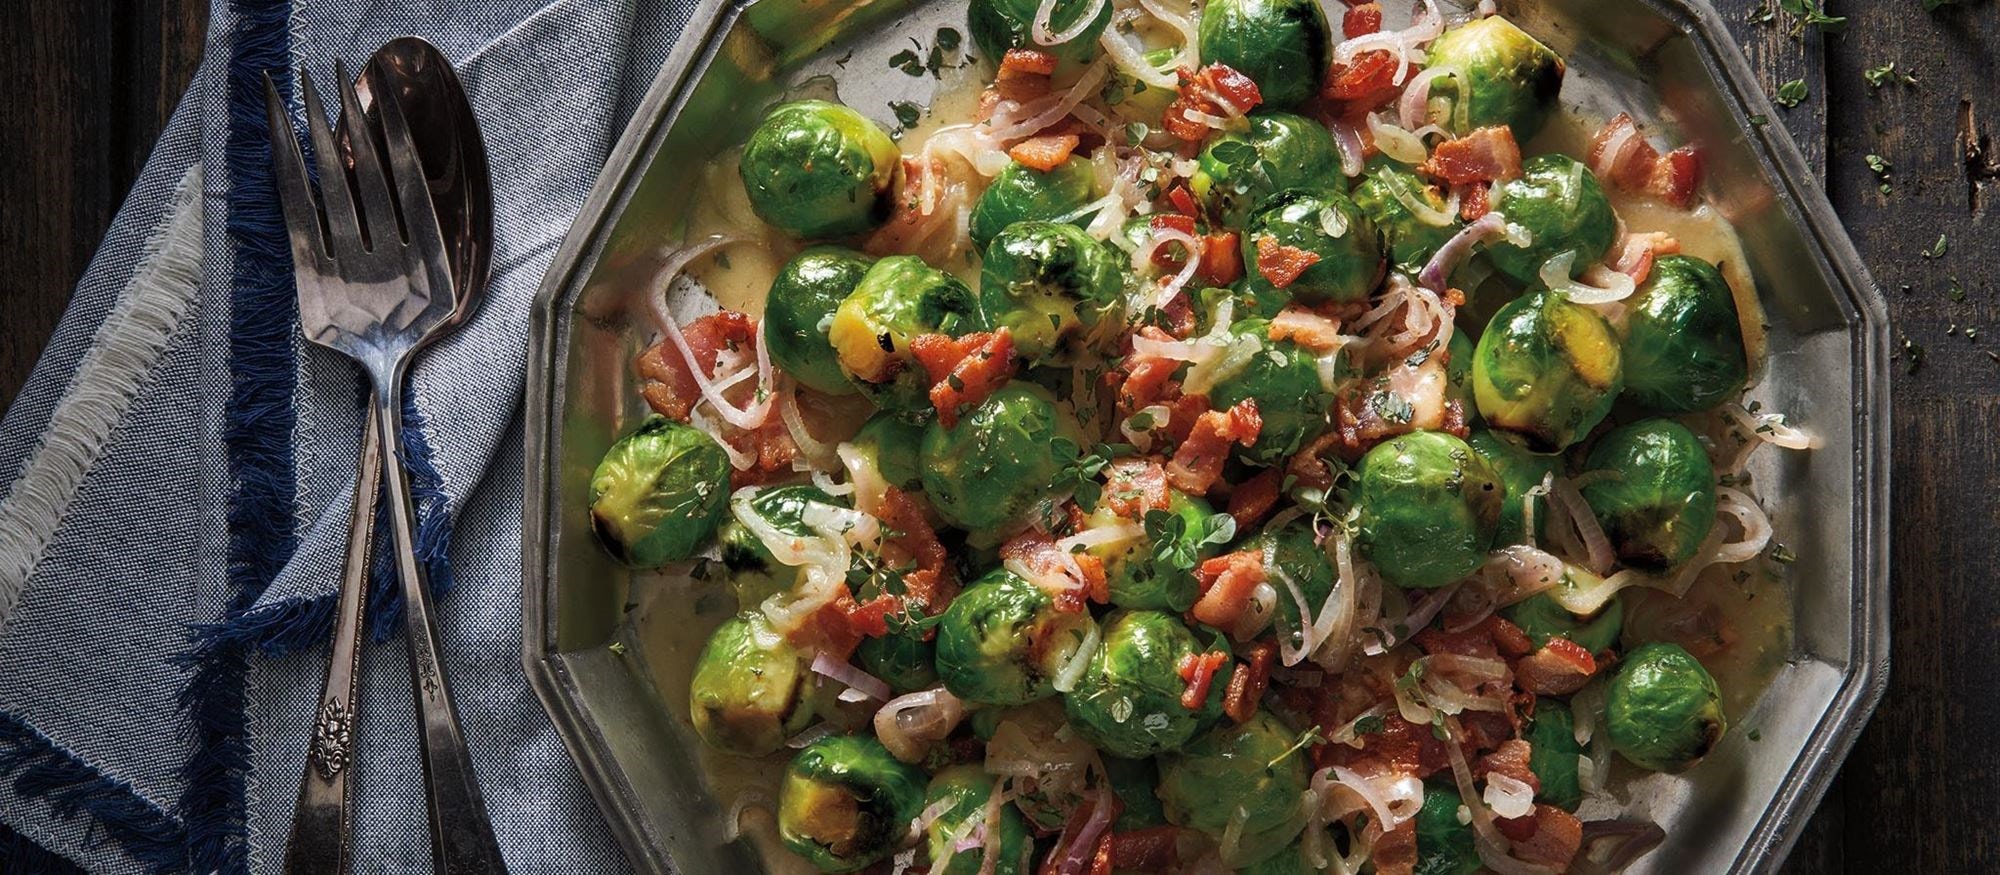 FOOD_BRUSSEL_SPROUTS_SLG_110316